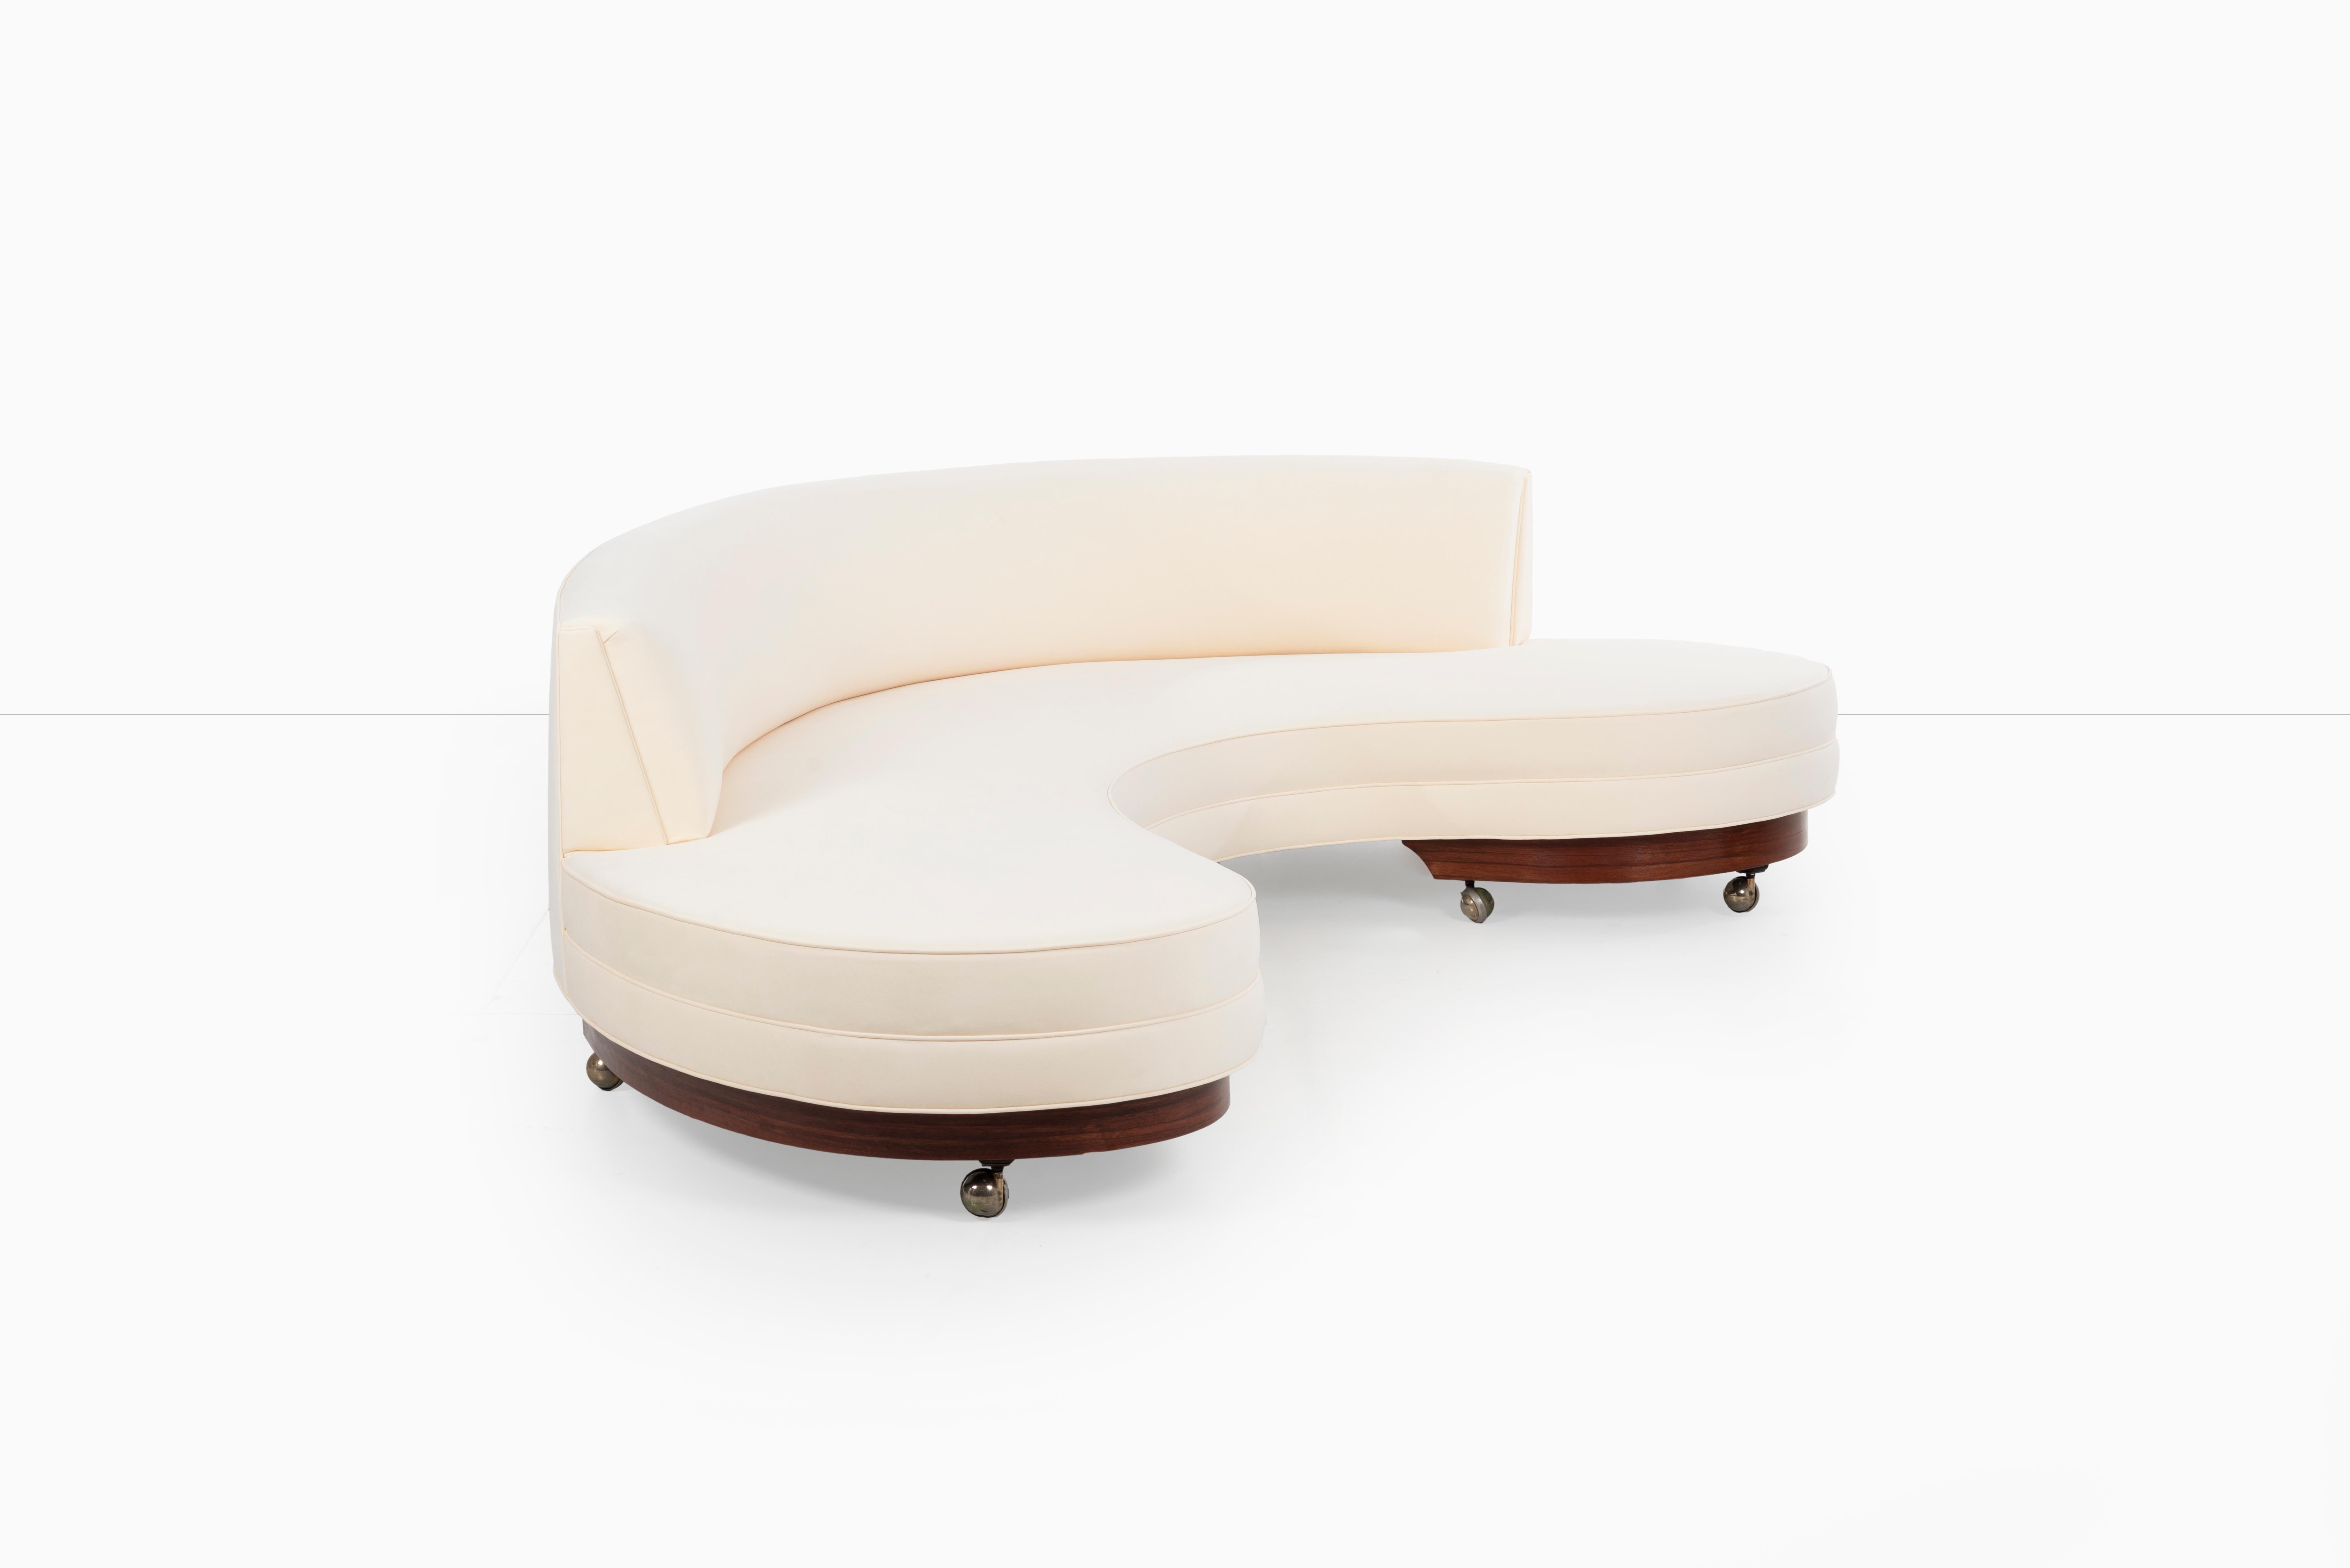 Vladimir Kagan for Kagan-Dreyfuss, Inc. Large Serpentine Sofa:
Completely rebuilt, restored, and reupholstered with Knoll Ultra suede with rosewood base, oiled finish with brass wheels.
About the fabric: Ultrasuede is the premier microfiber in the